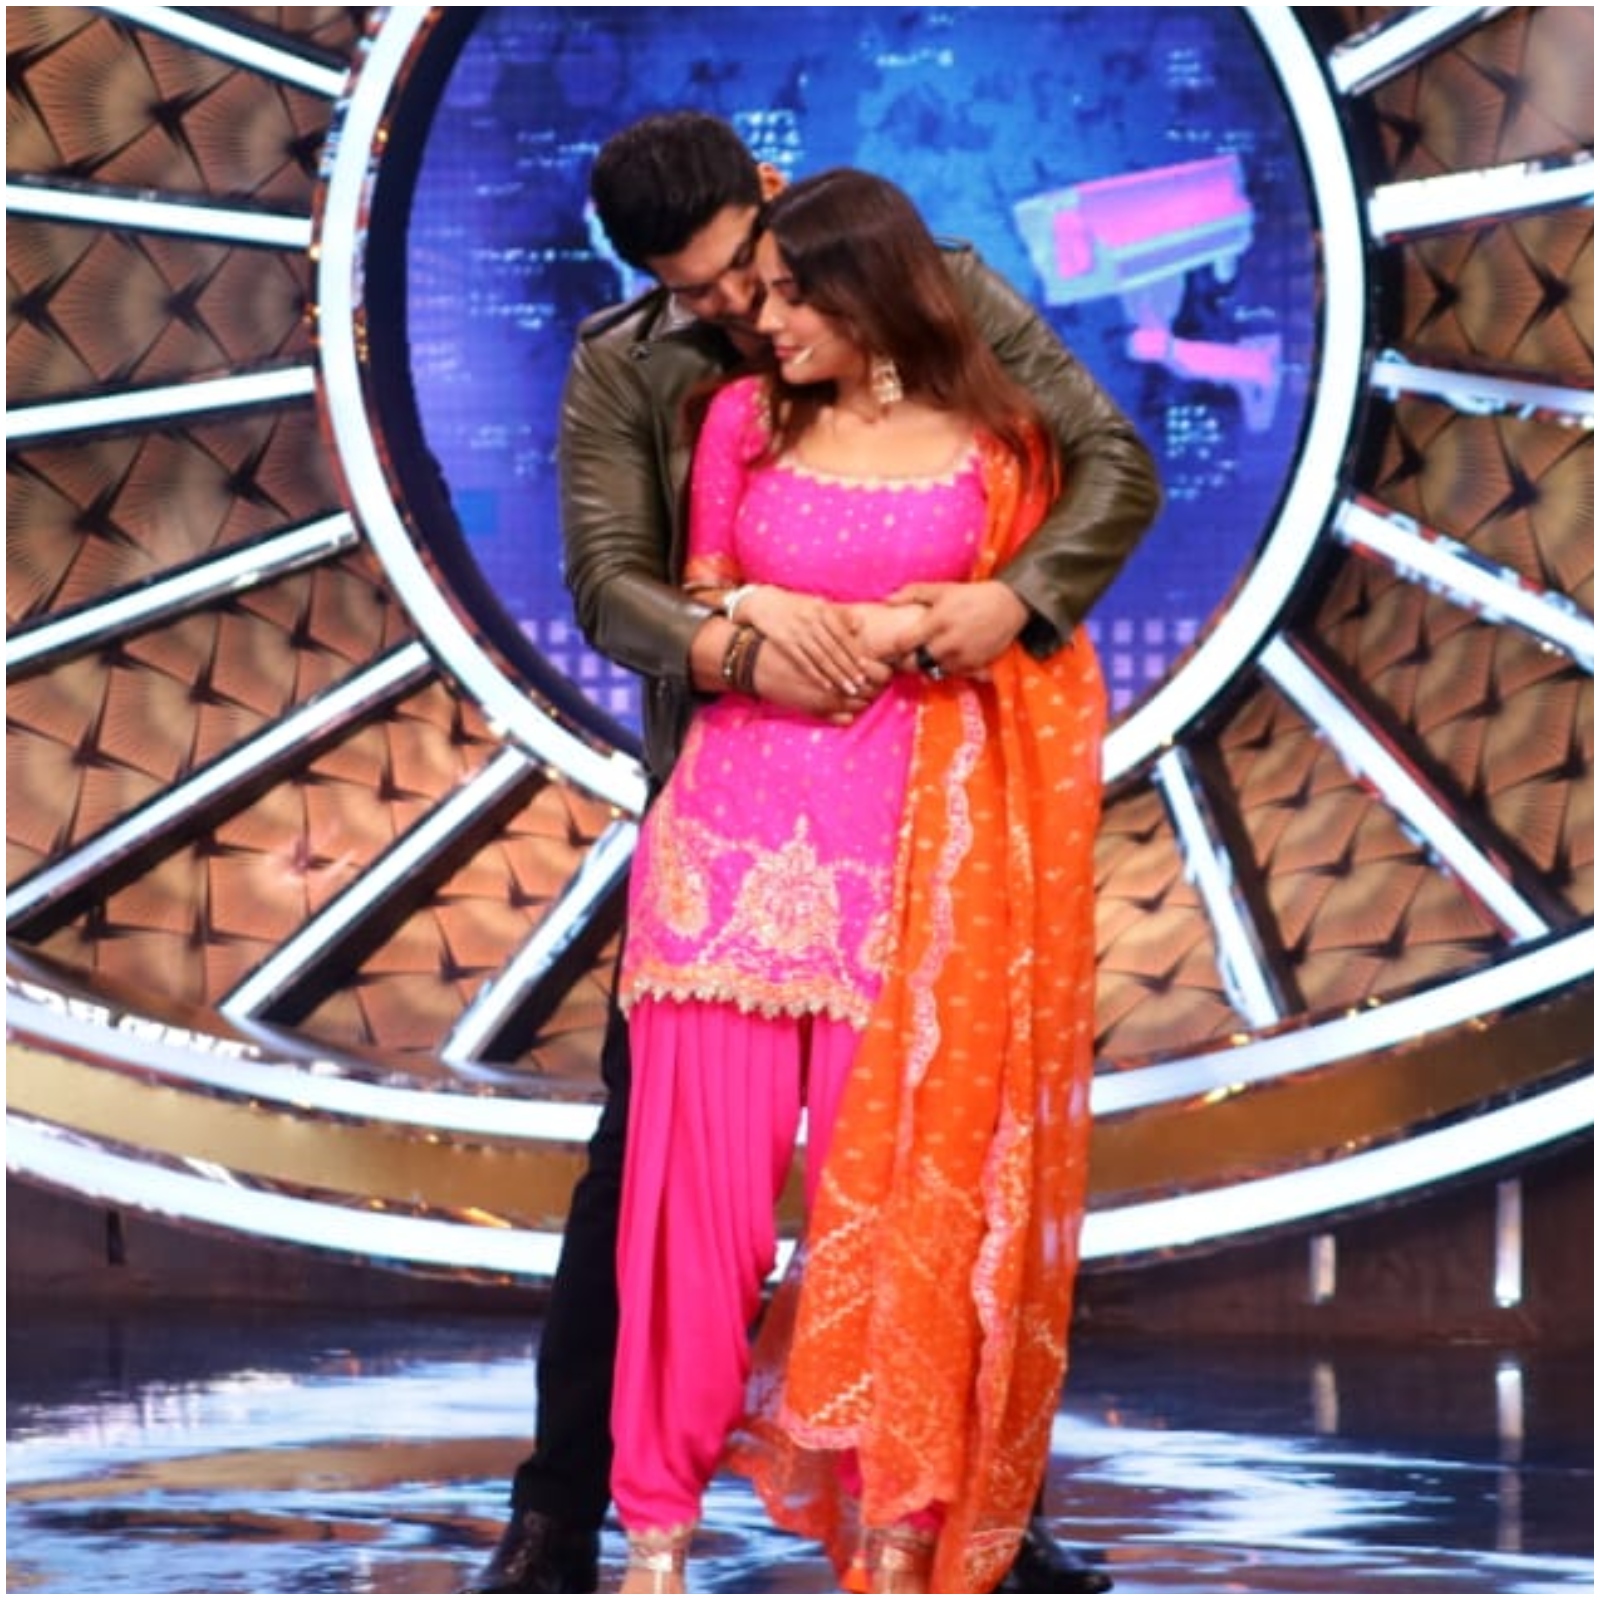 Popularly called Sidnazz by fans, Sidharth Shukla and Shehnaaz Gill were first seen together in Bigg Boss 13.